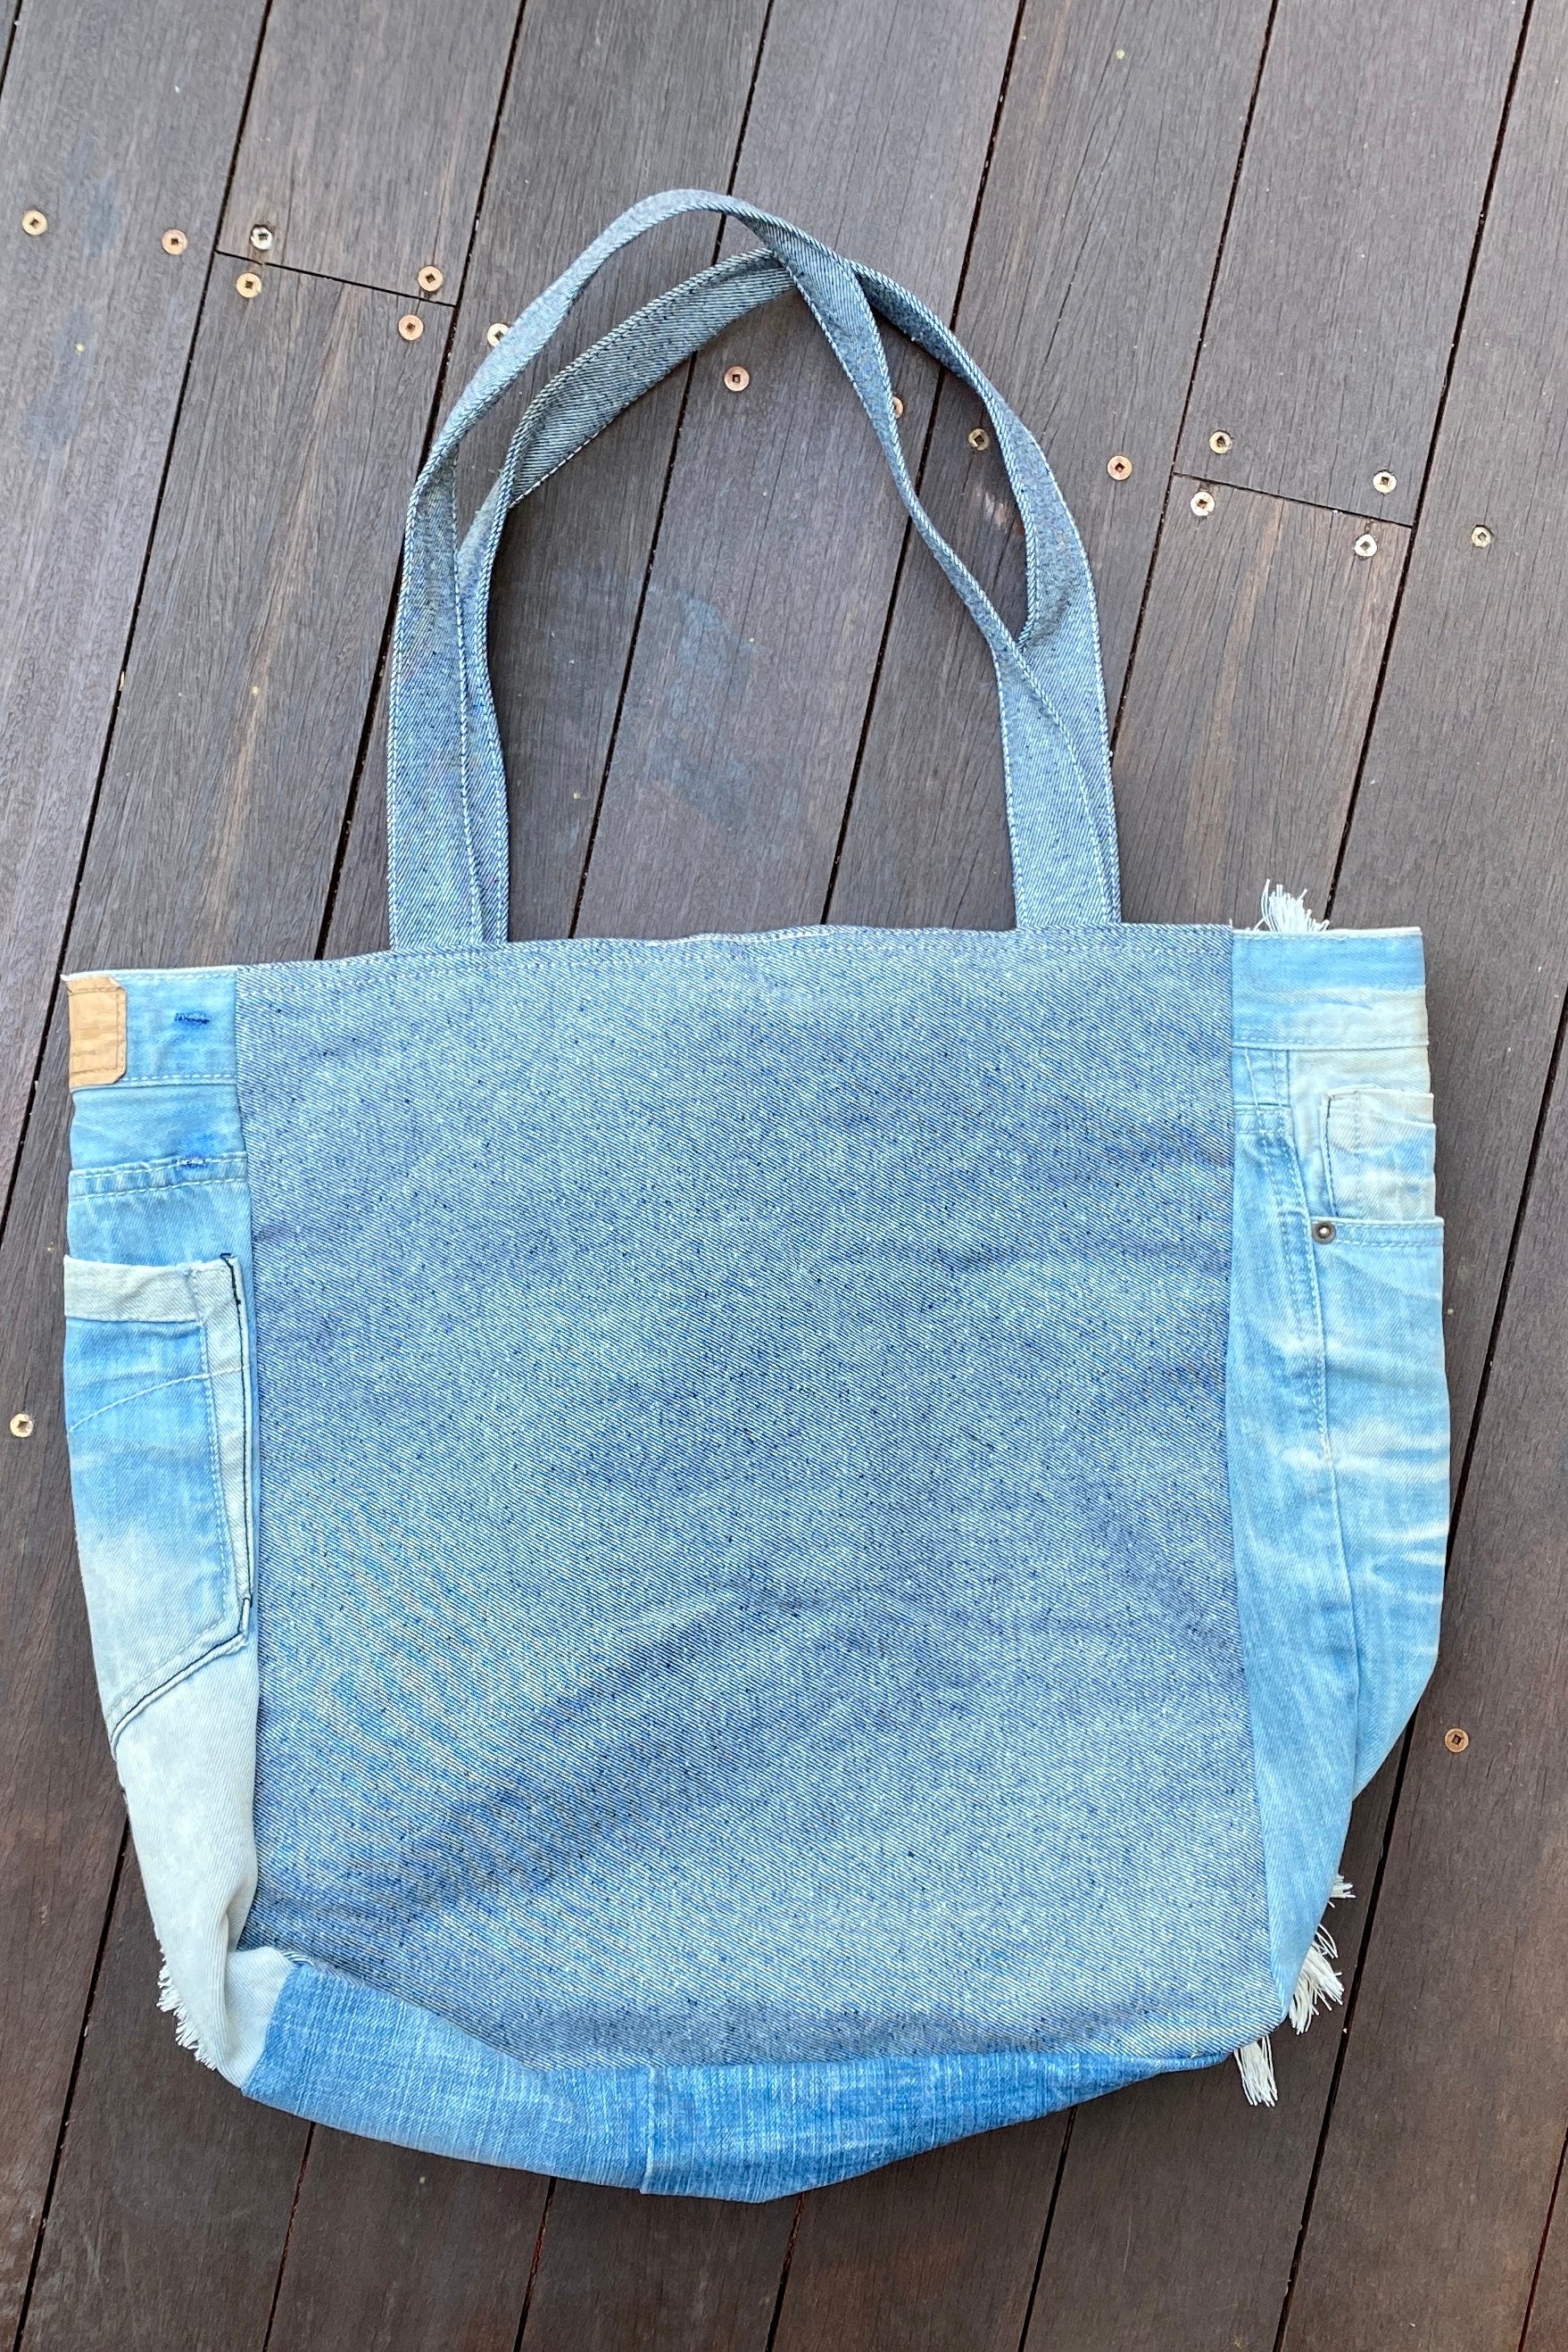 Denim shoulder bag that I made from old jeans. Very happy how it turned  out. : r/MadeMeSmile